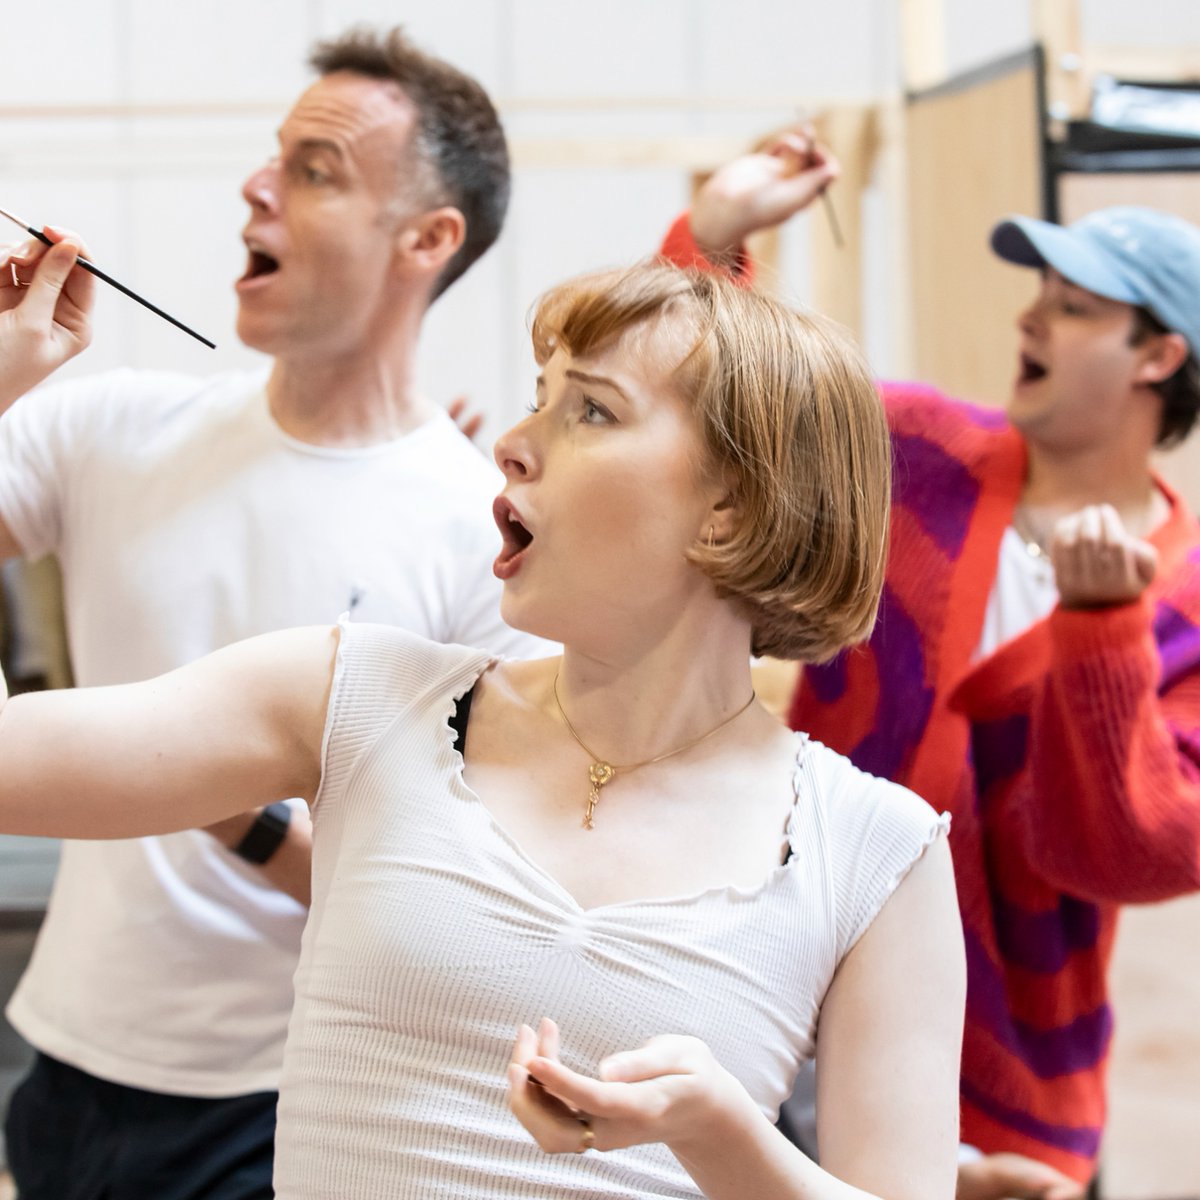 PHOTO ALERT - 1st look inside the rehearsal room MARIE CURIE THE MUSICAL 📸 @peachyraith 📍@CharingCrossThr ⏰ Saturday 1 June - Sunday 28 July Book Tickets zurl.co/iFSE #theatre #theatrefan #theatrenews #photo #photooftheday